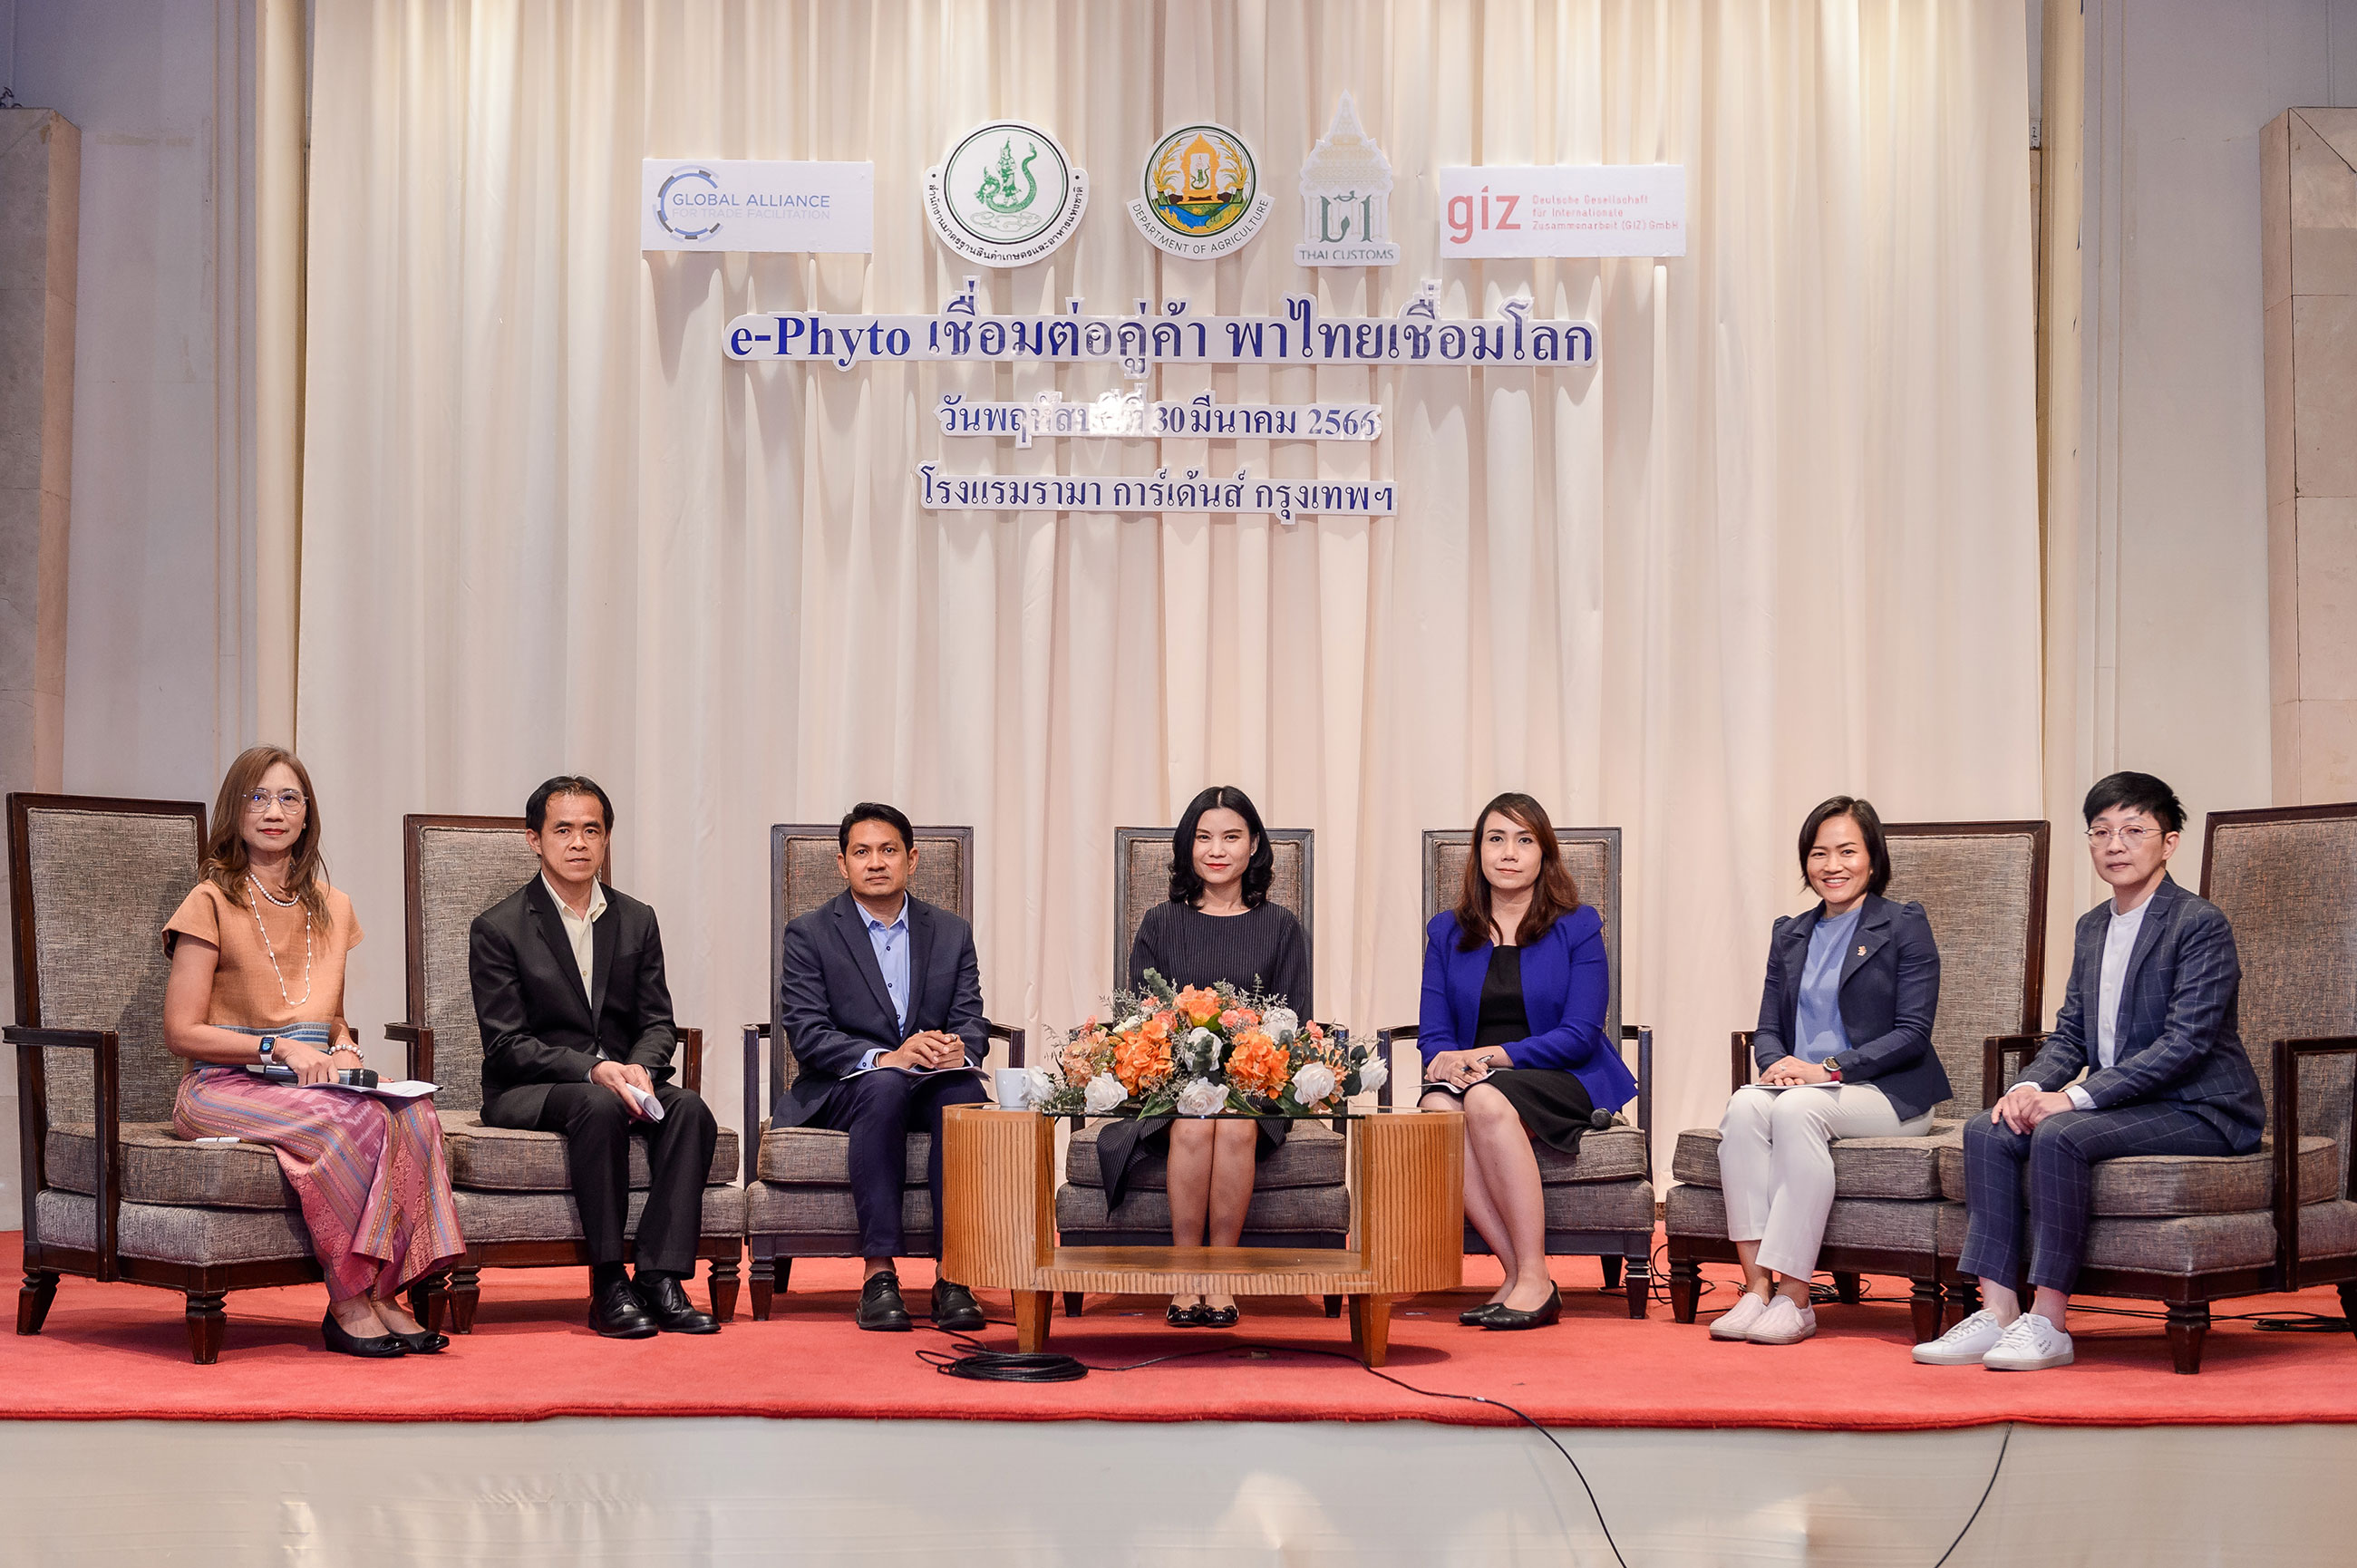 Panel discussion on experiences with ePhyto in Thailand